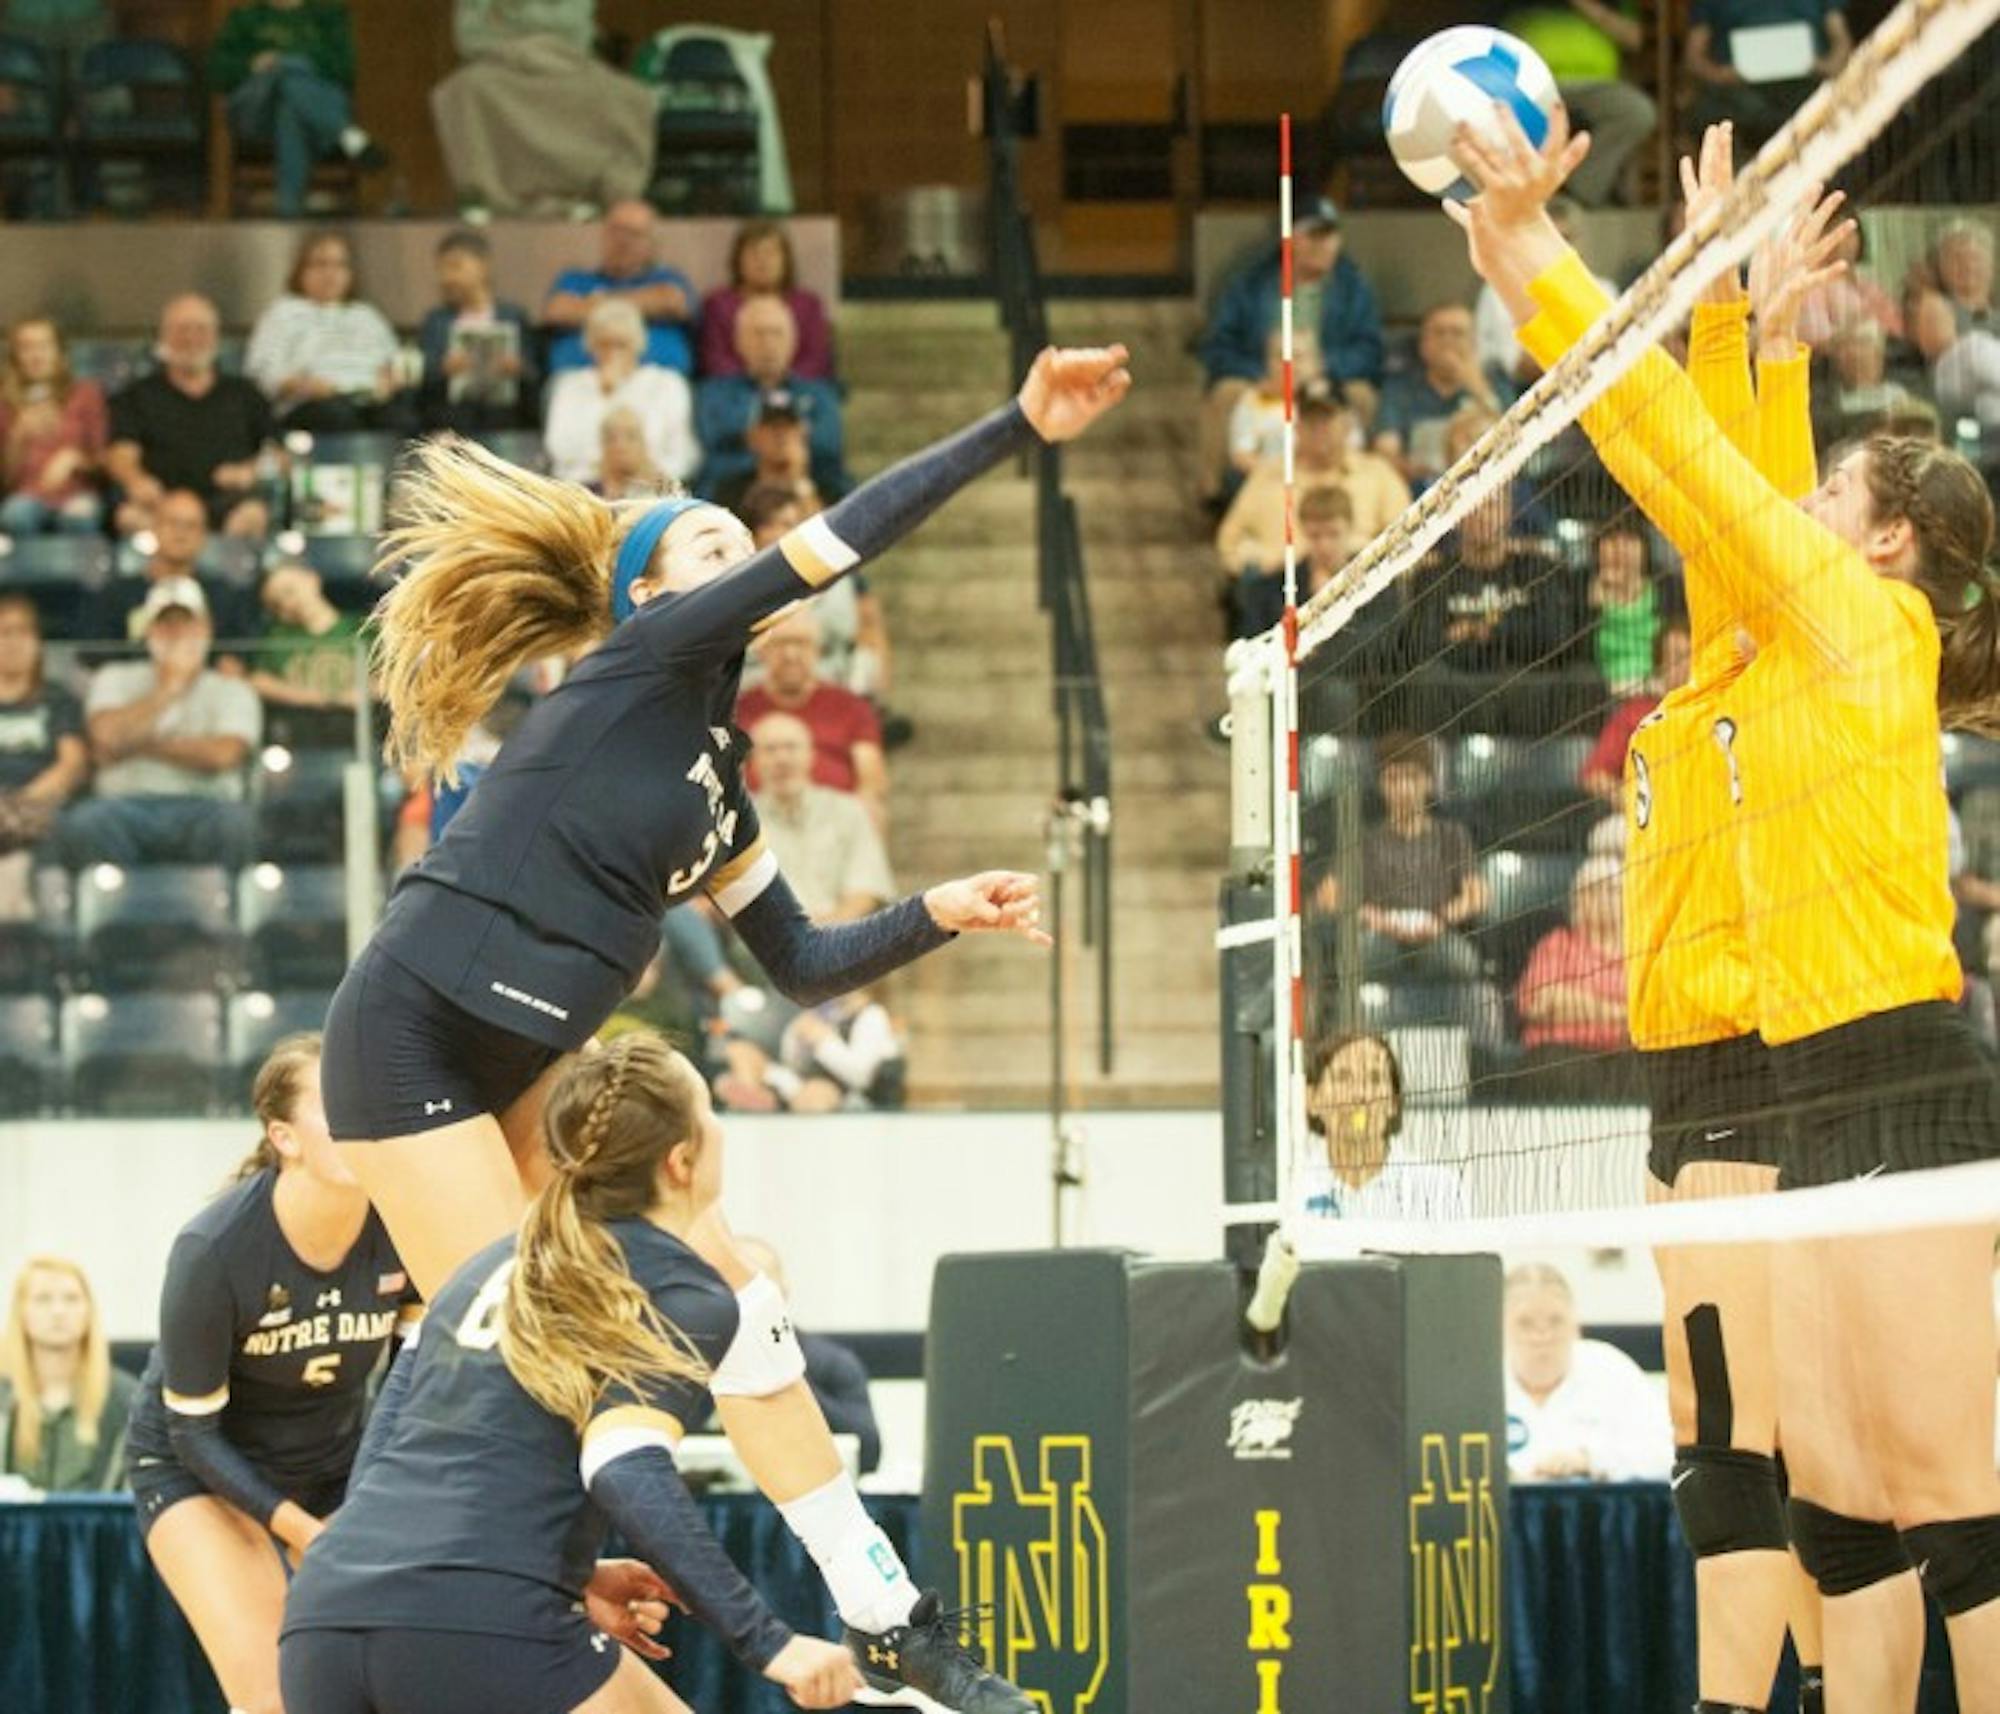 Irish senior middle blocker Sam Fry goes up for a kill during Notre Dame’s 3-1 win over Valparaiso on Aug. 25 at Compton Family Ice Arena. Fry was name ACC Player of the Week this week.